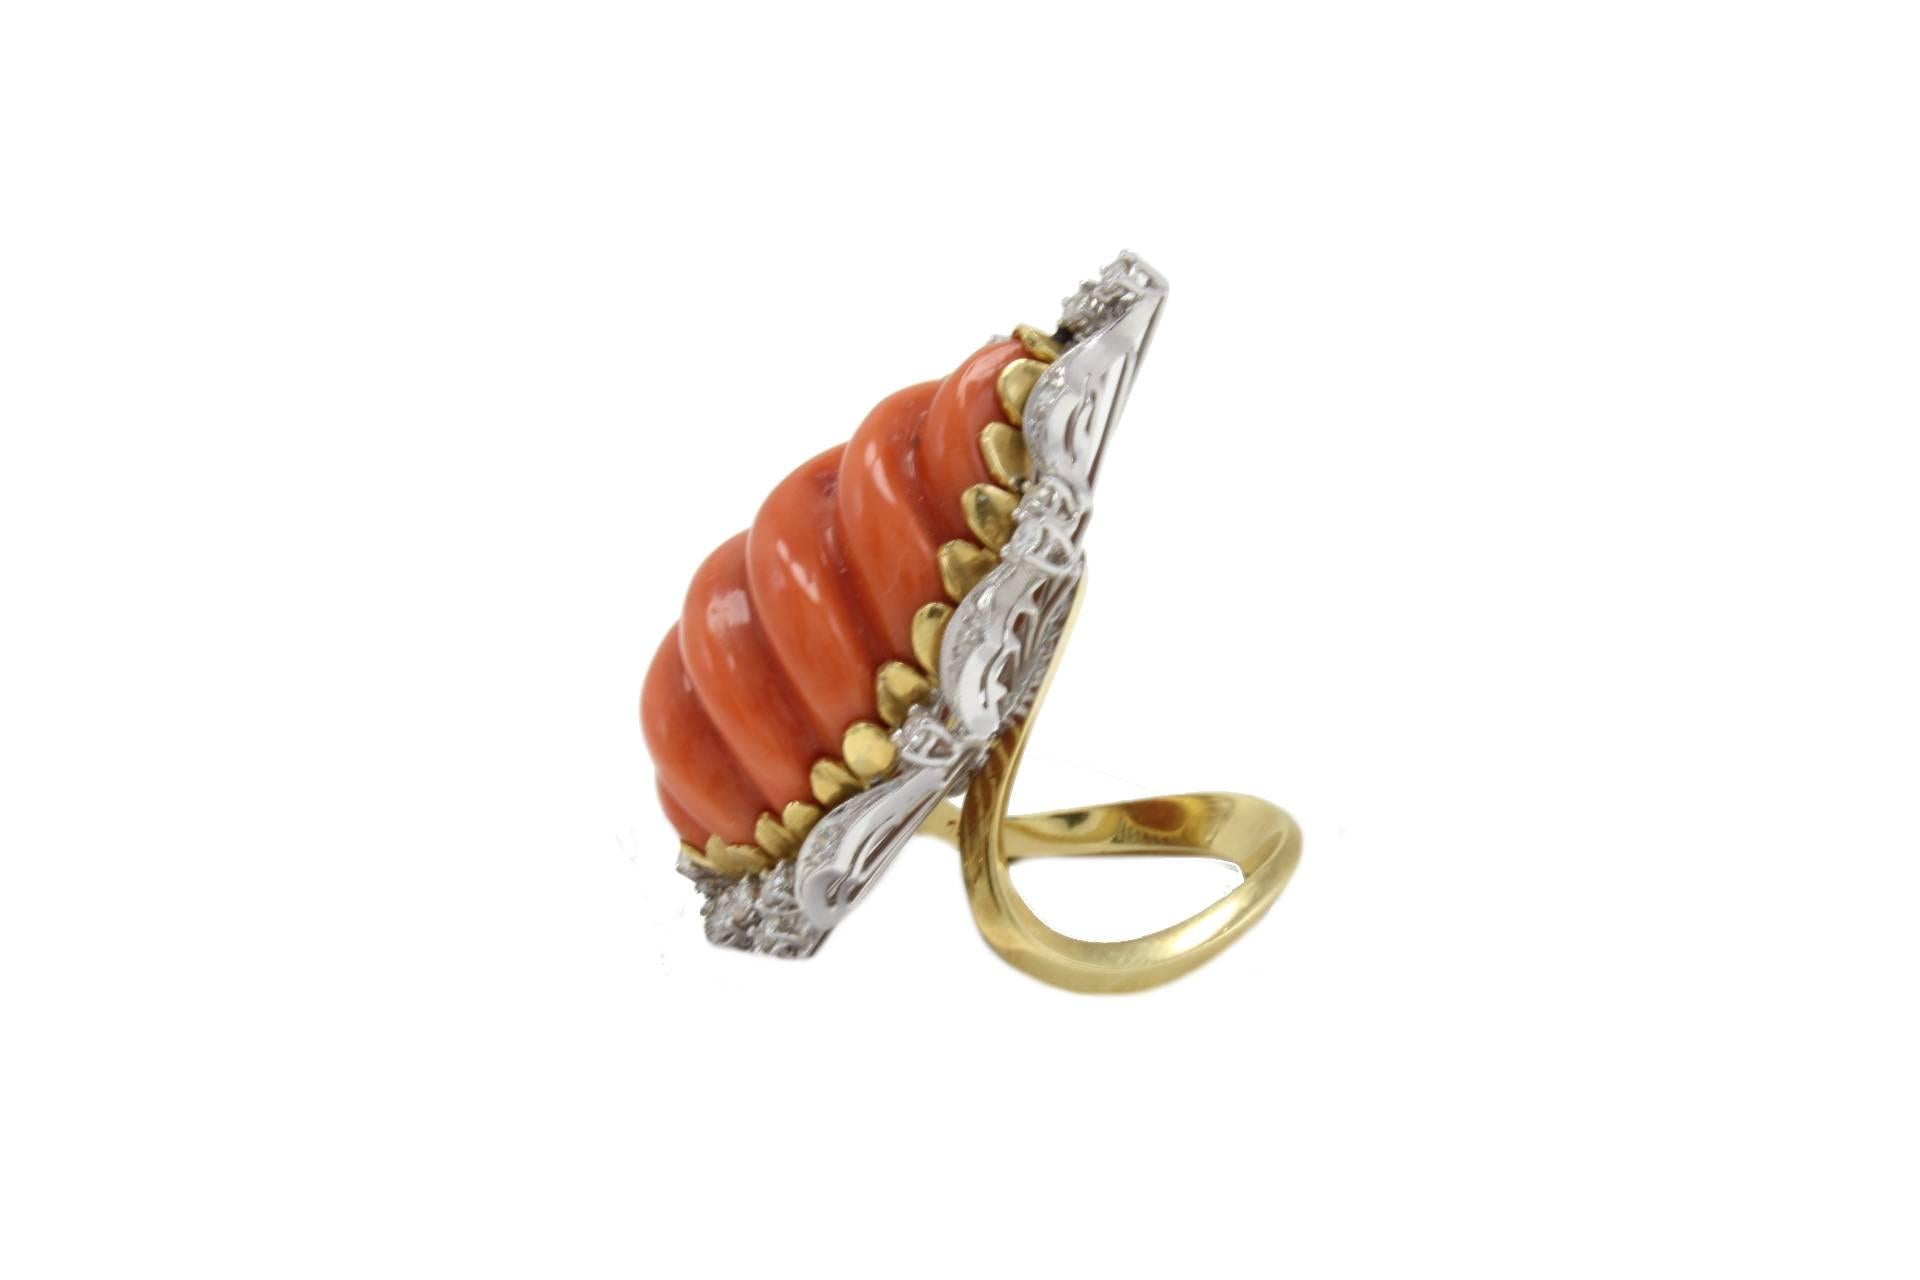 shipping policy: 
No additional costs will be added to this order.
Shipping costs will be totally covered by the seller (customs duties included). 


Shapely ring in 18kt white and yellow gold composed of a central carved coral drop surrounded by a